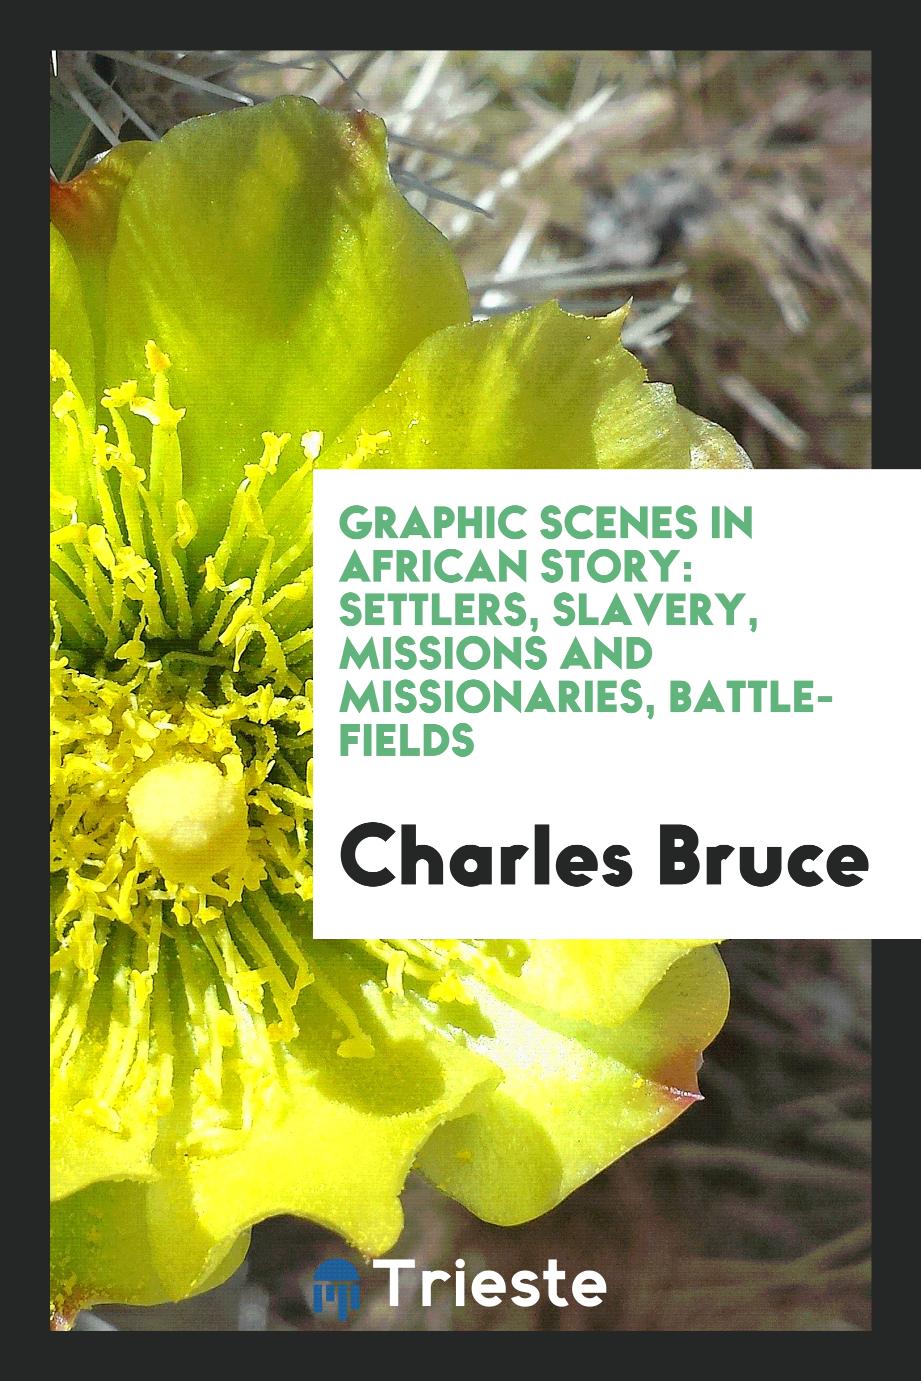 Graphic scenes in African story: settlers, slavery, missions and missionaries, battle-fields